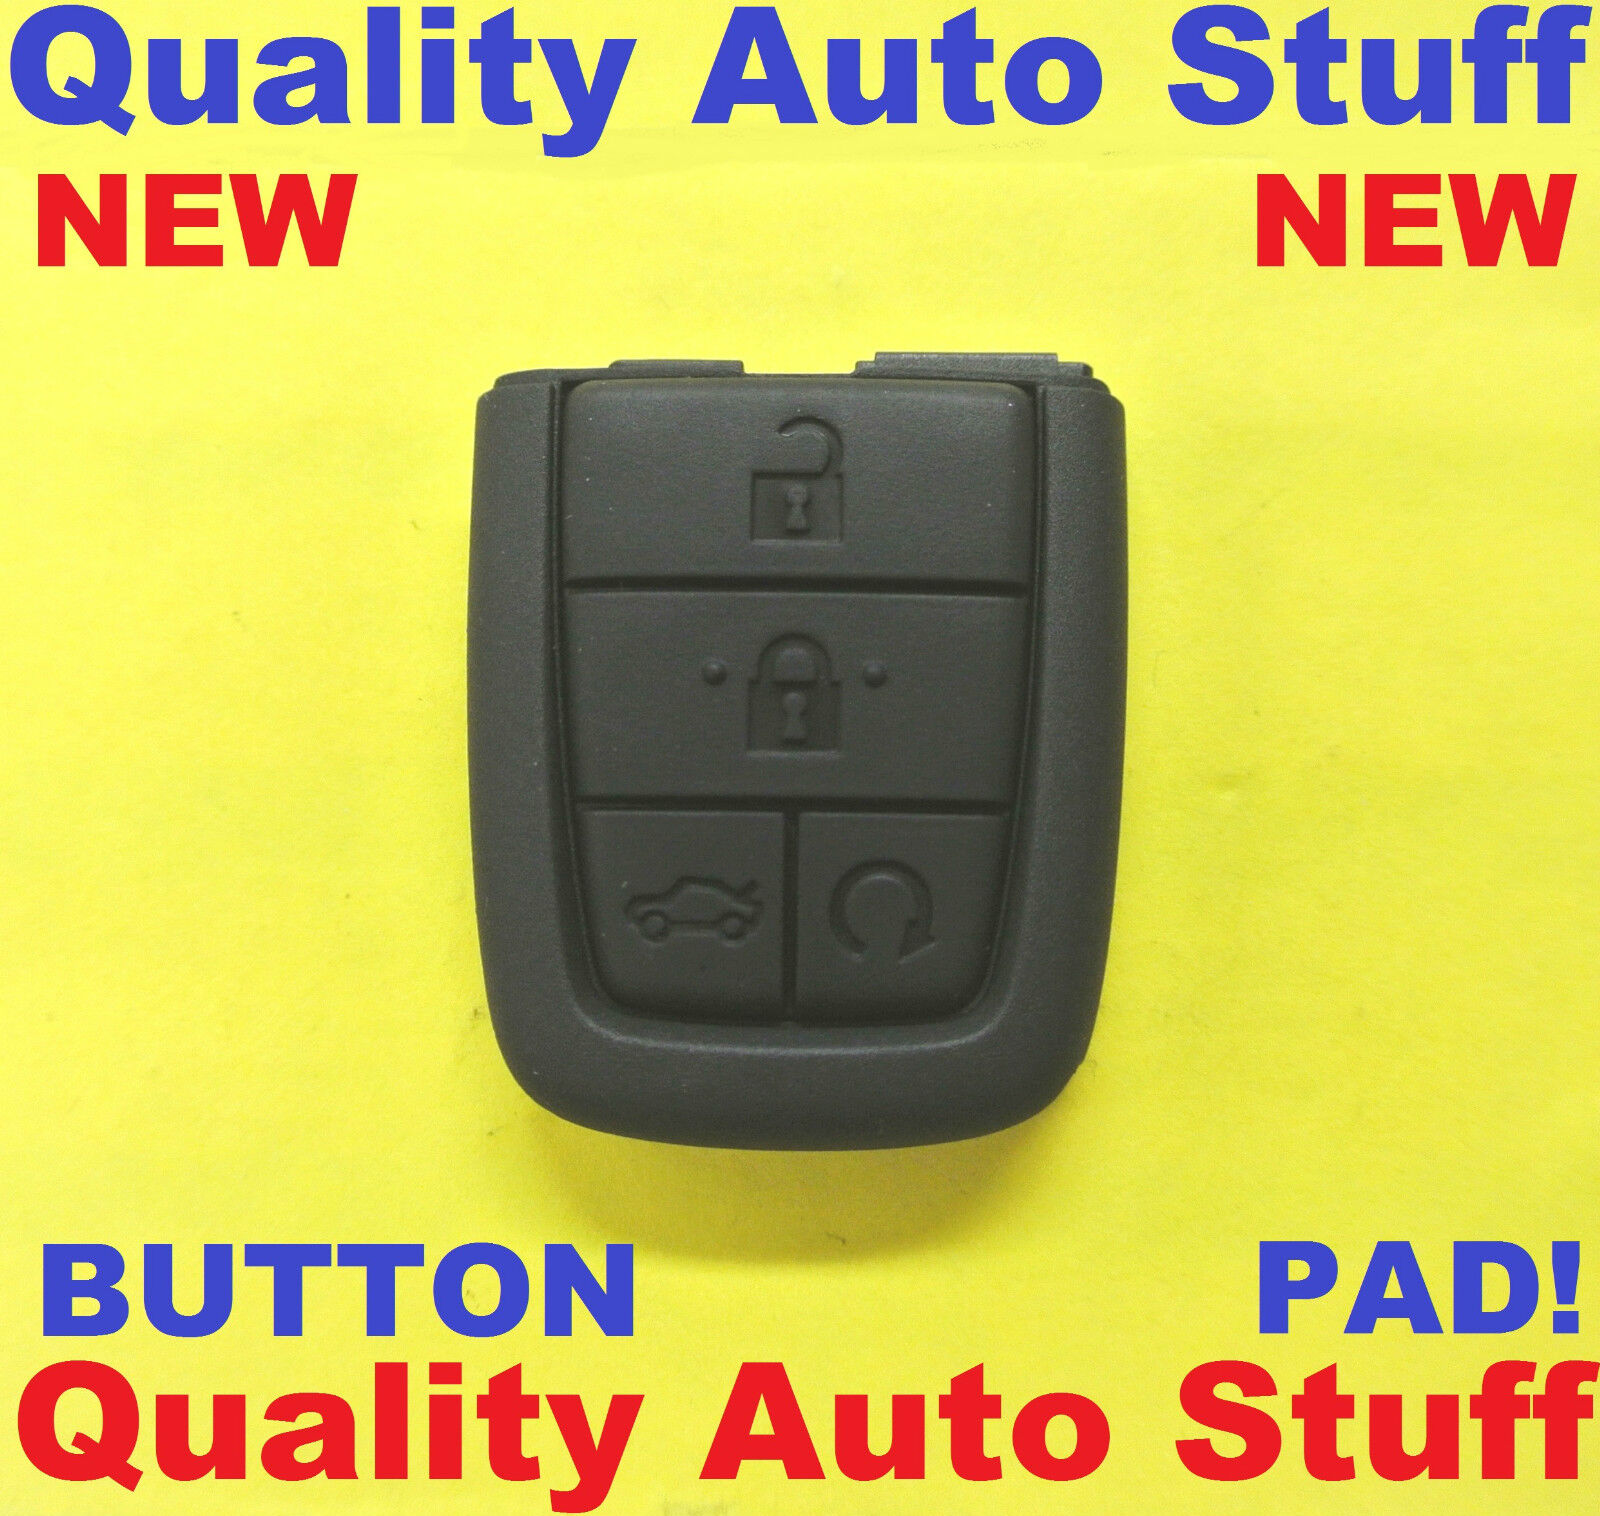 NEW OEM SEALED 2008 2009 Pontiac G8 Replacement Remote 4 Button Pad 92245050